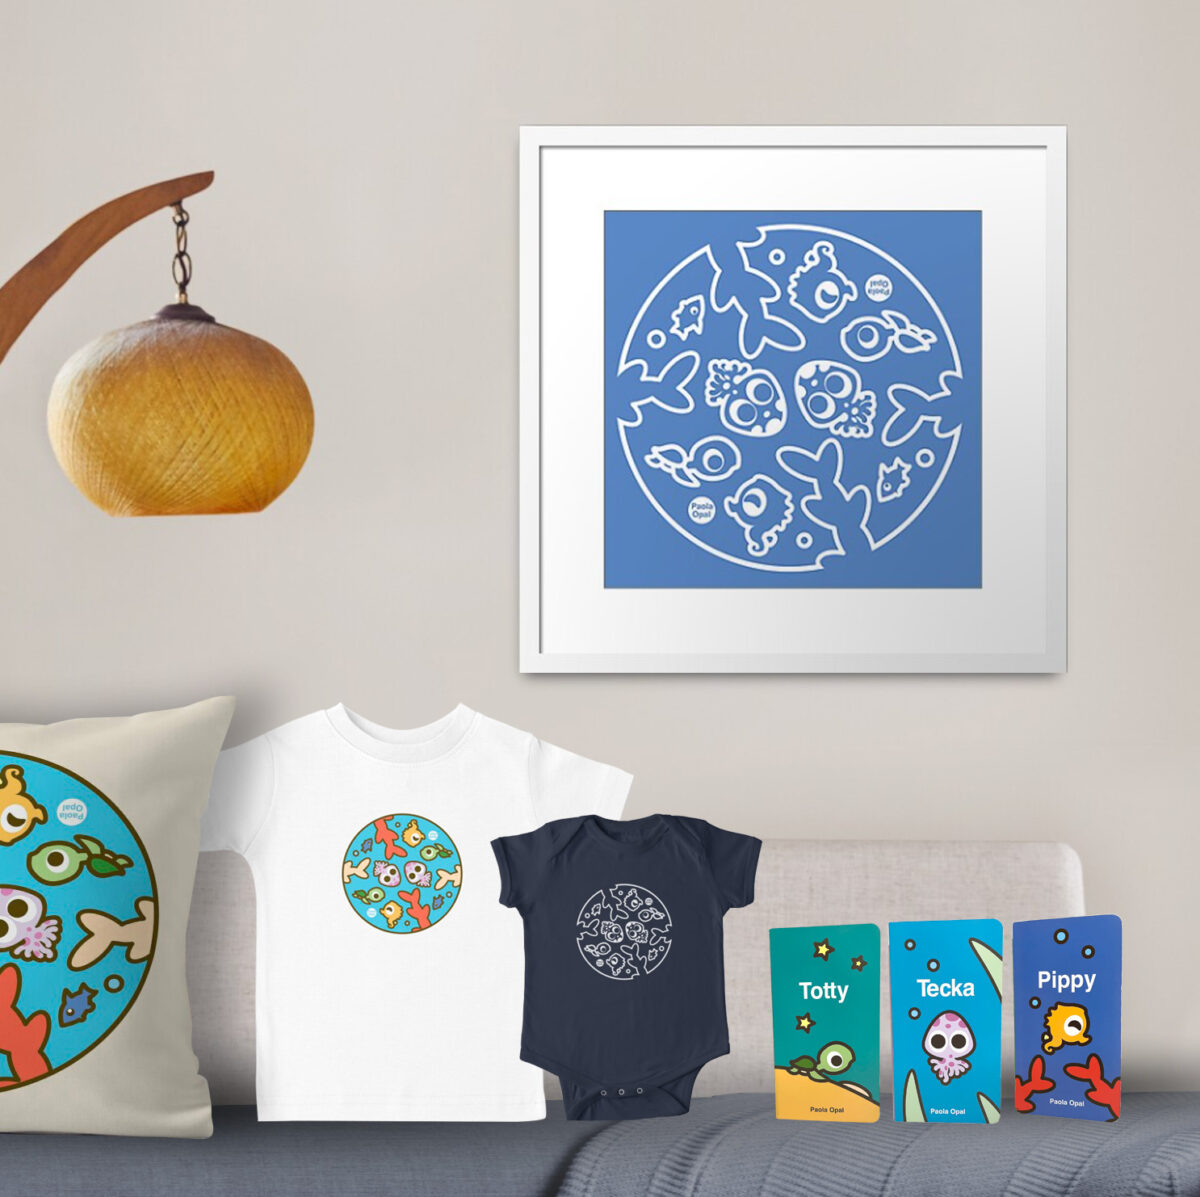 Art print, pillow, t-shirt, baby onesie and books featuring Pippy the seahorse, Tecka the octopus, and Totty the turtle